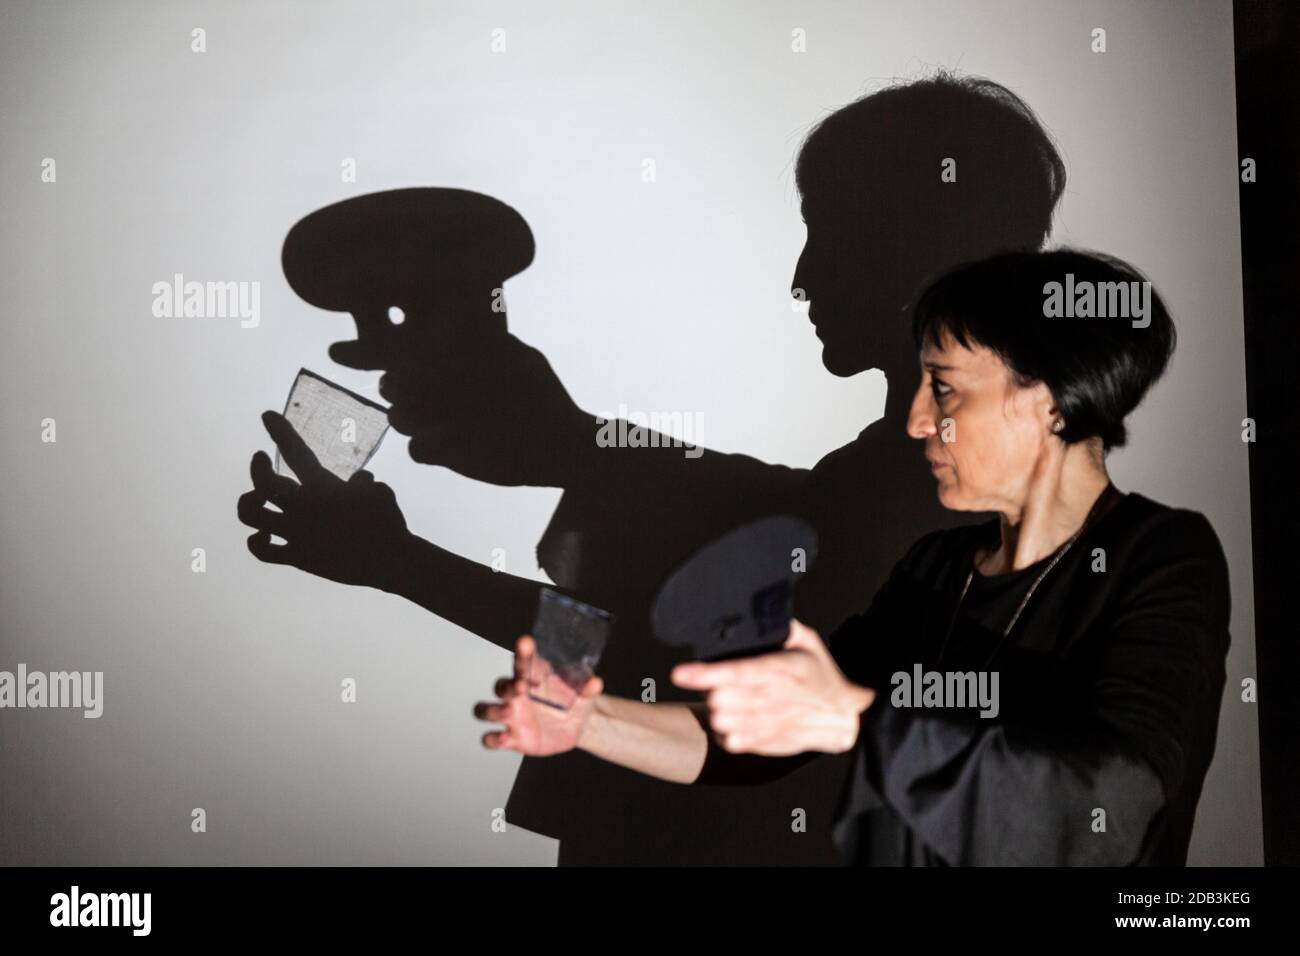 play shadow projected on a white screen. the person's hands shape a cook drinking from a glass Stock Photo